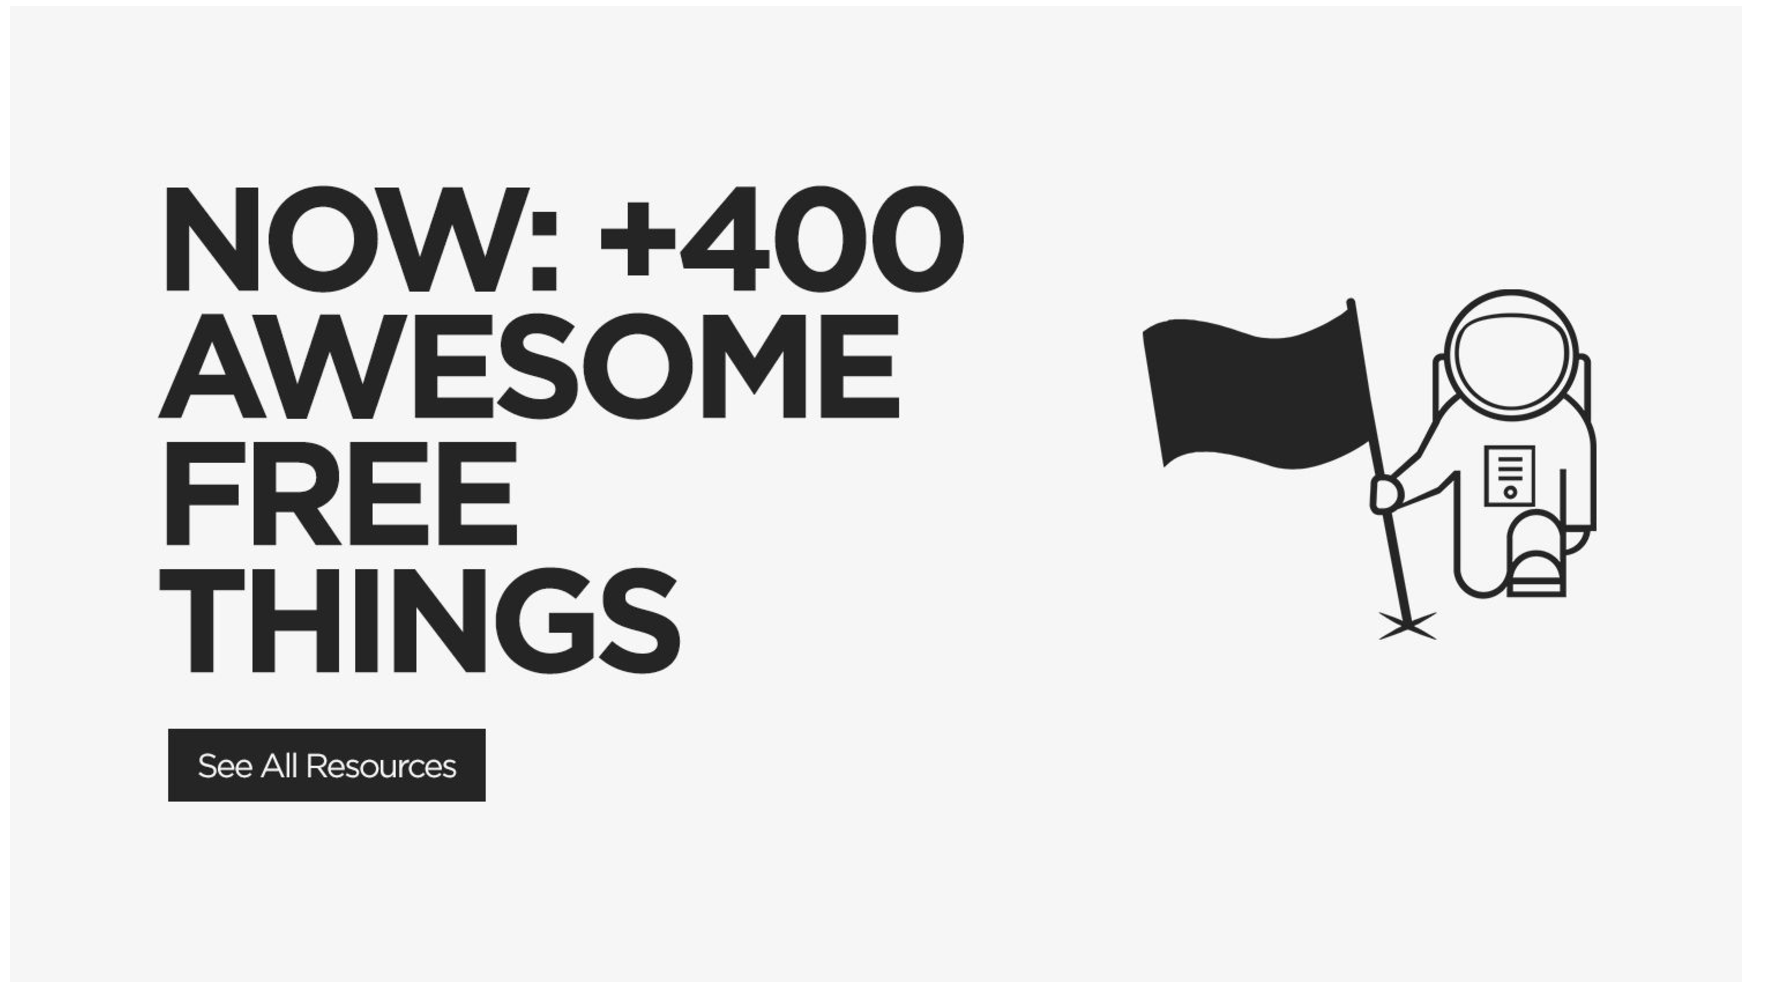 AWESOME FREE THINGS FOR ENTREPRENEURS & STARTUPS